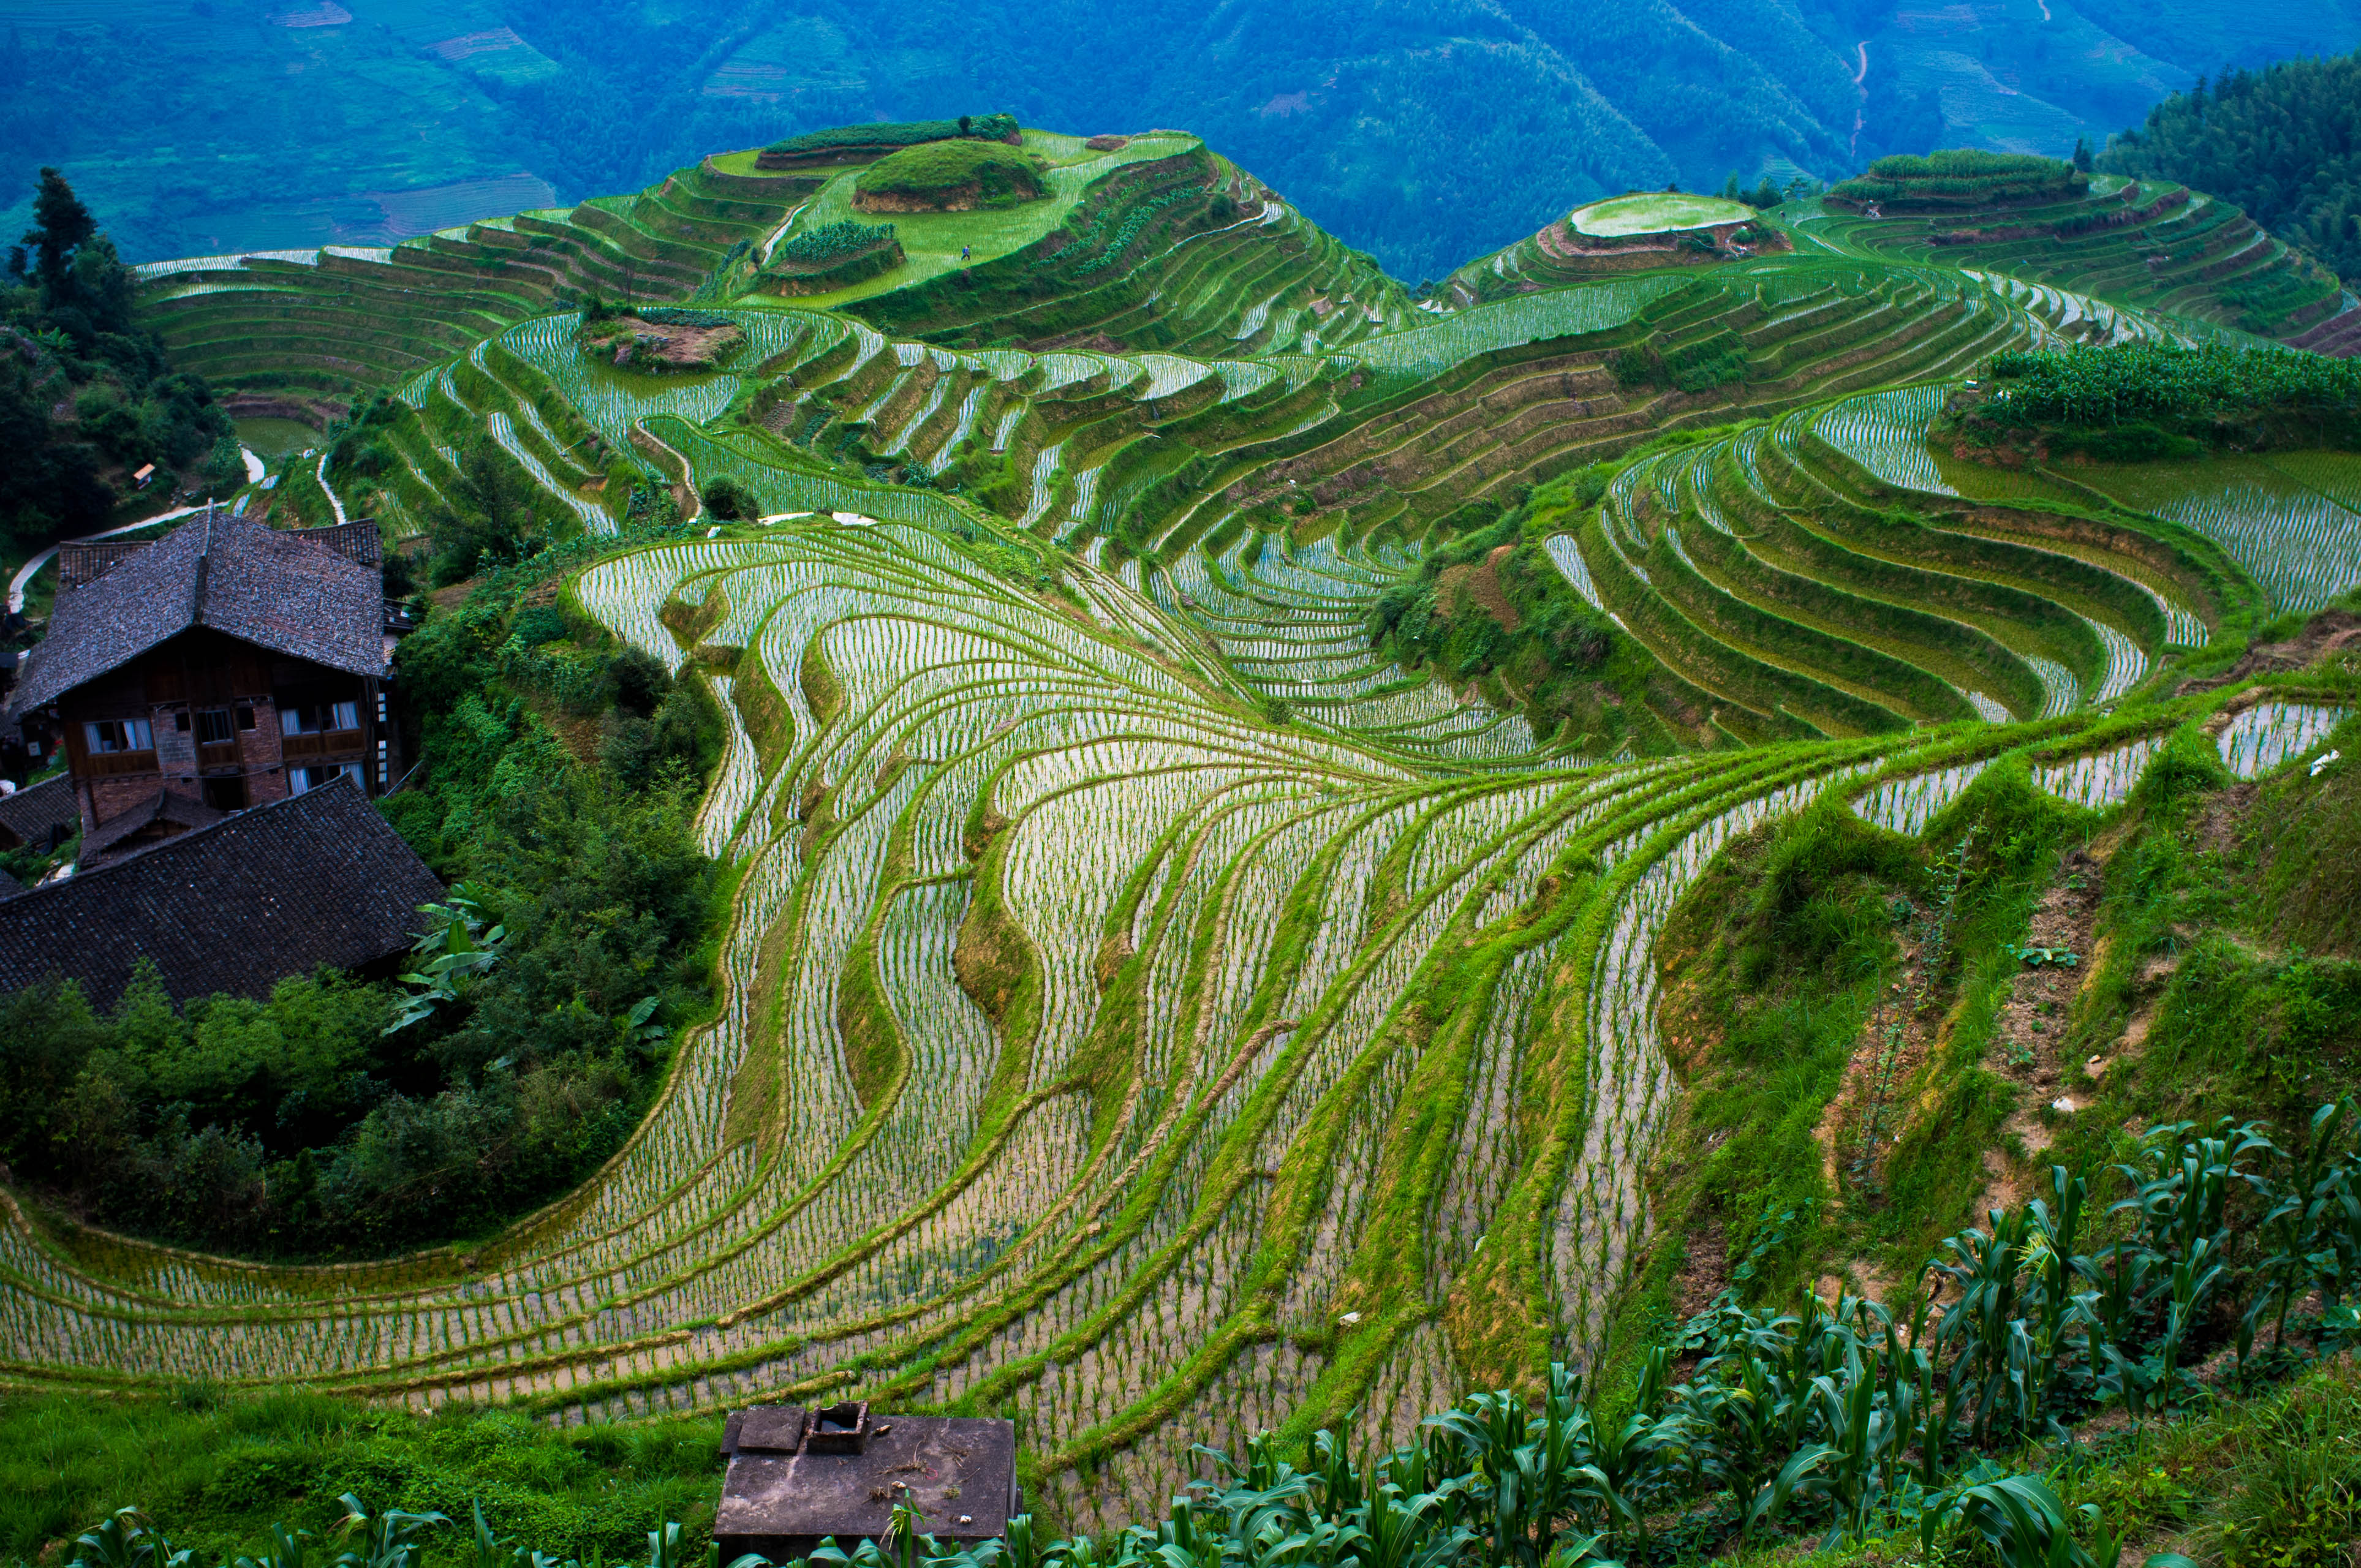 Images of Rice Terrace | 3854x2560